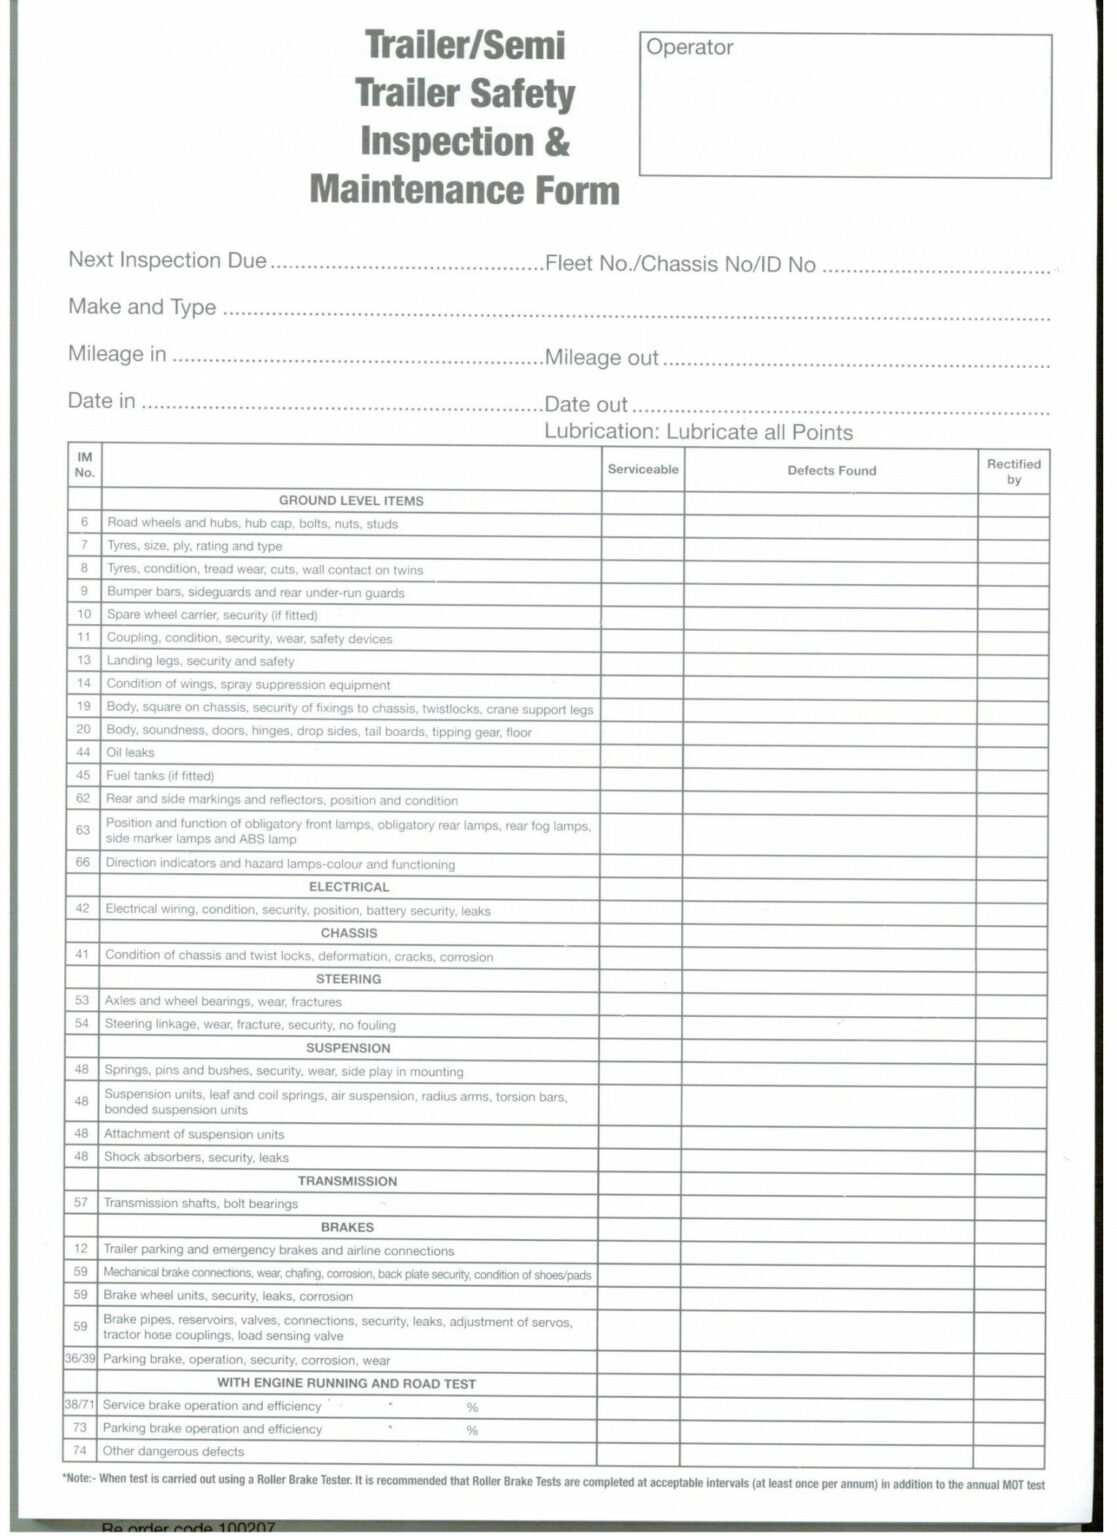 Printable Trailer And Semi Trailers Inspection And Rectification Report